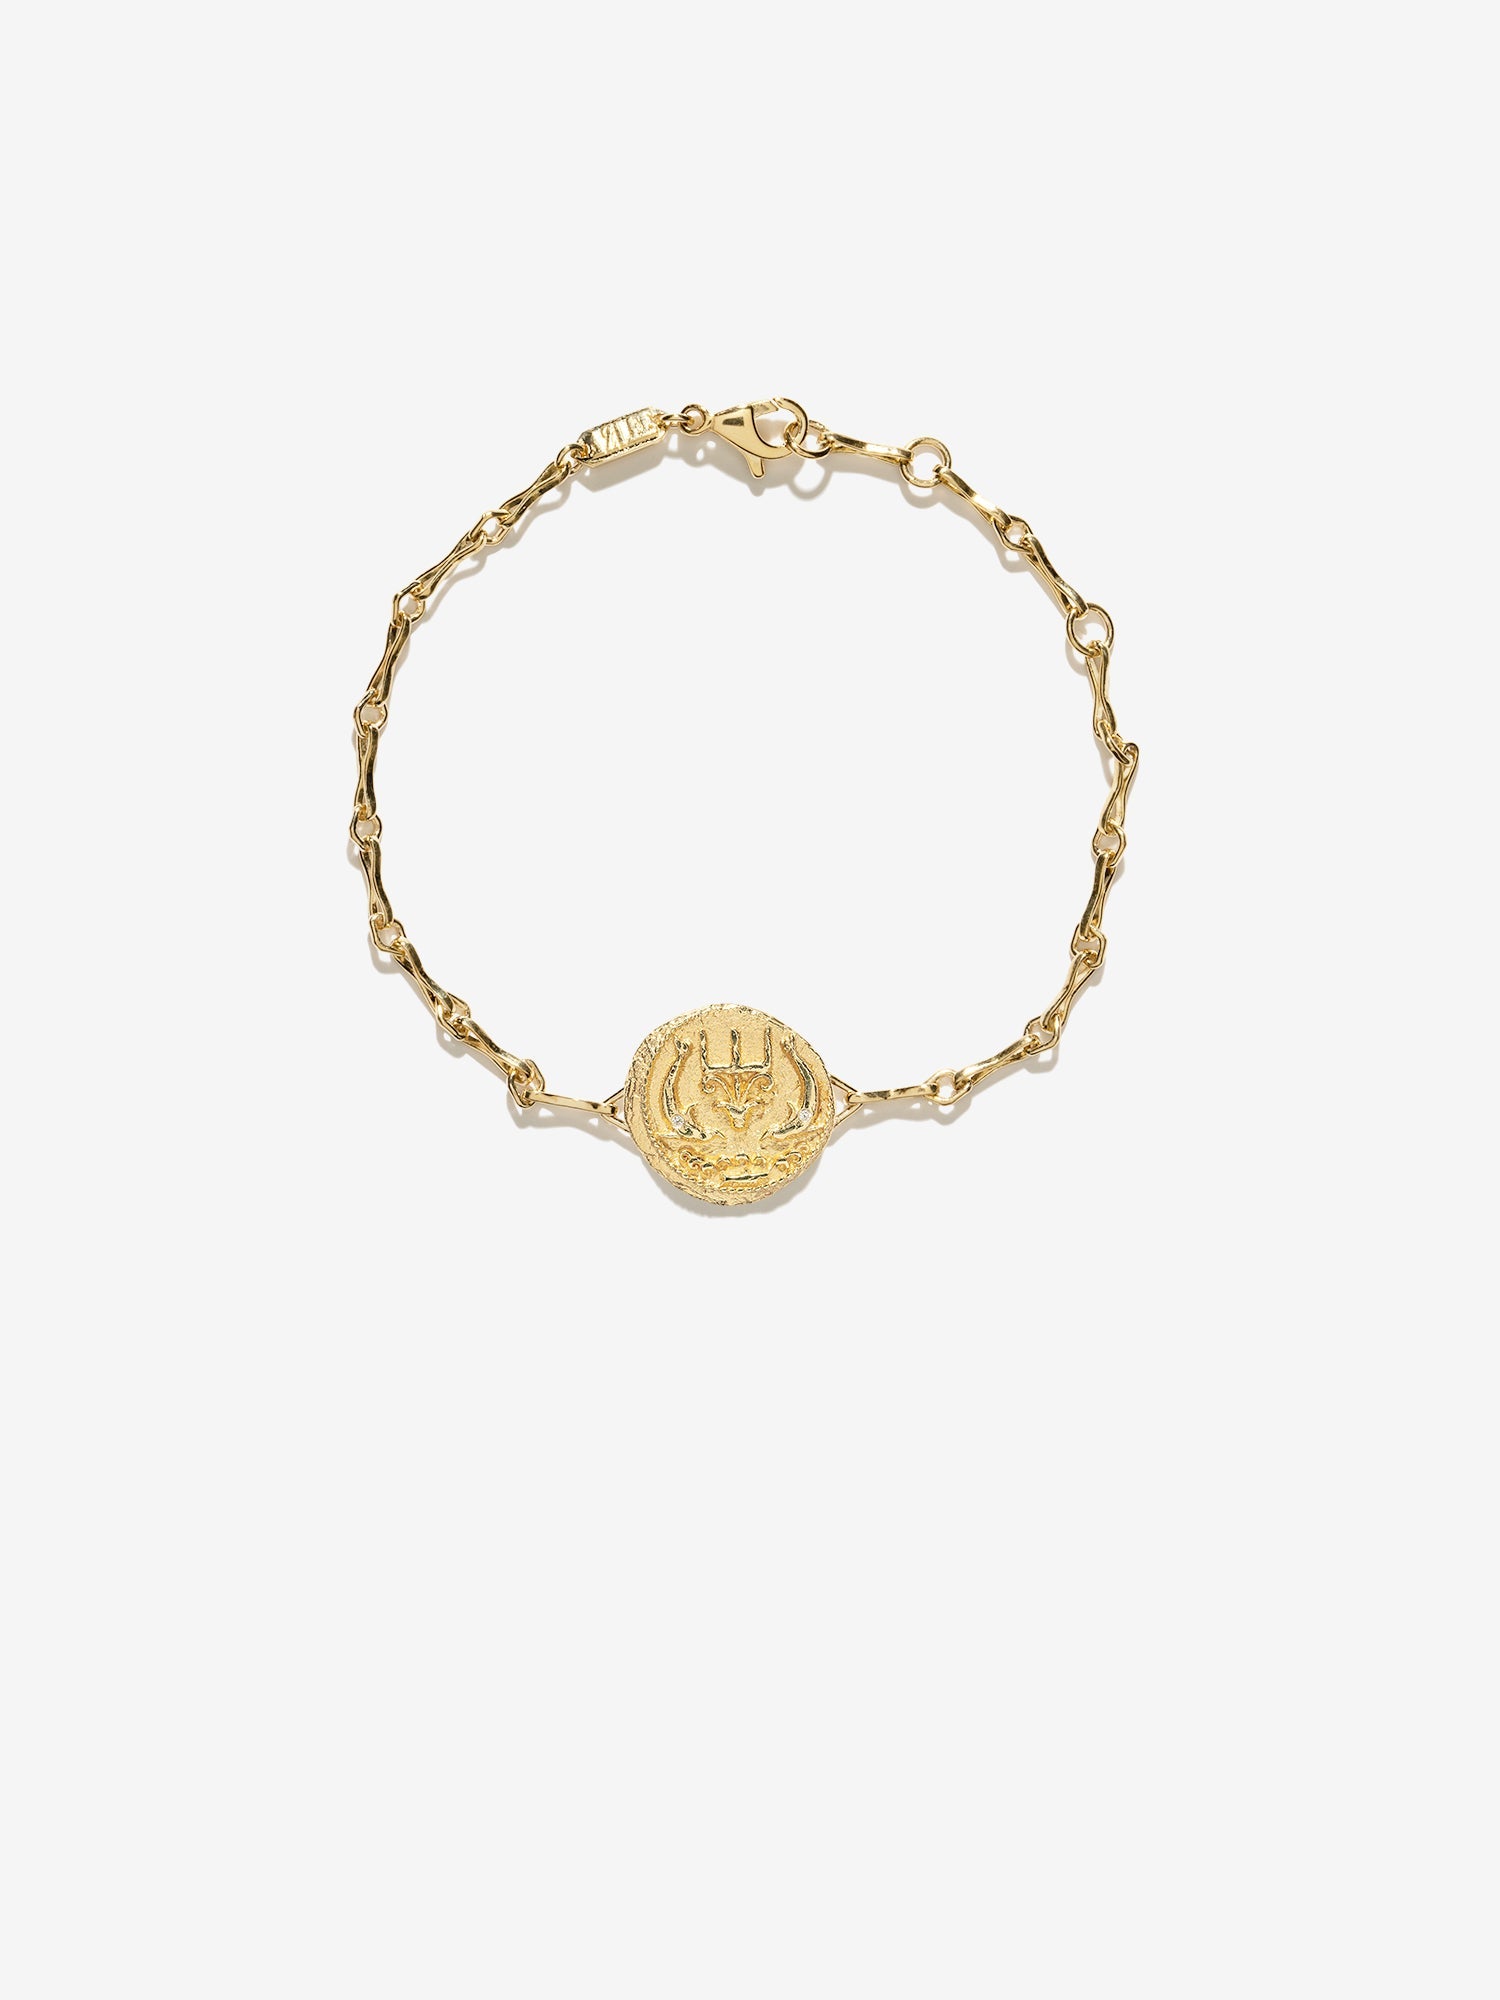 Of The Sea Coin Bracelet